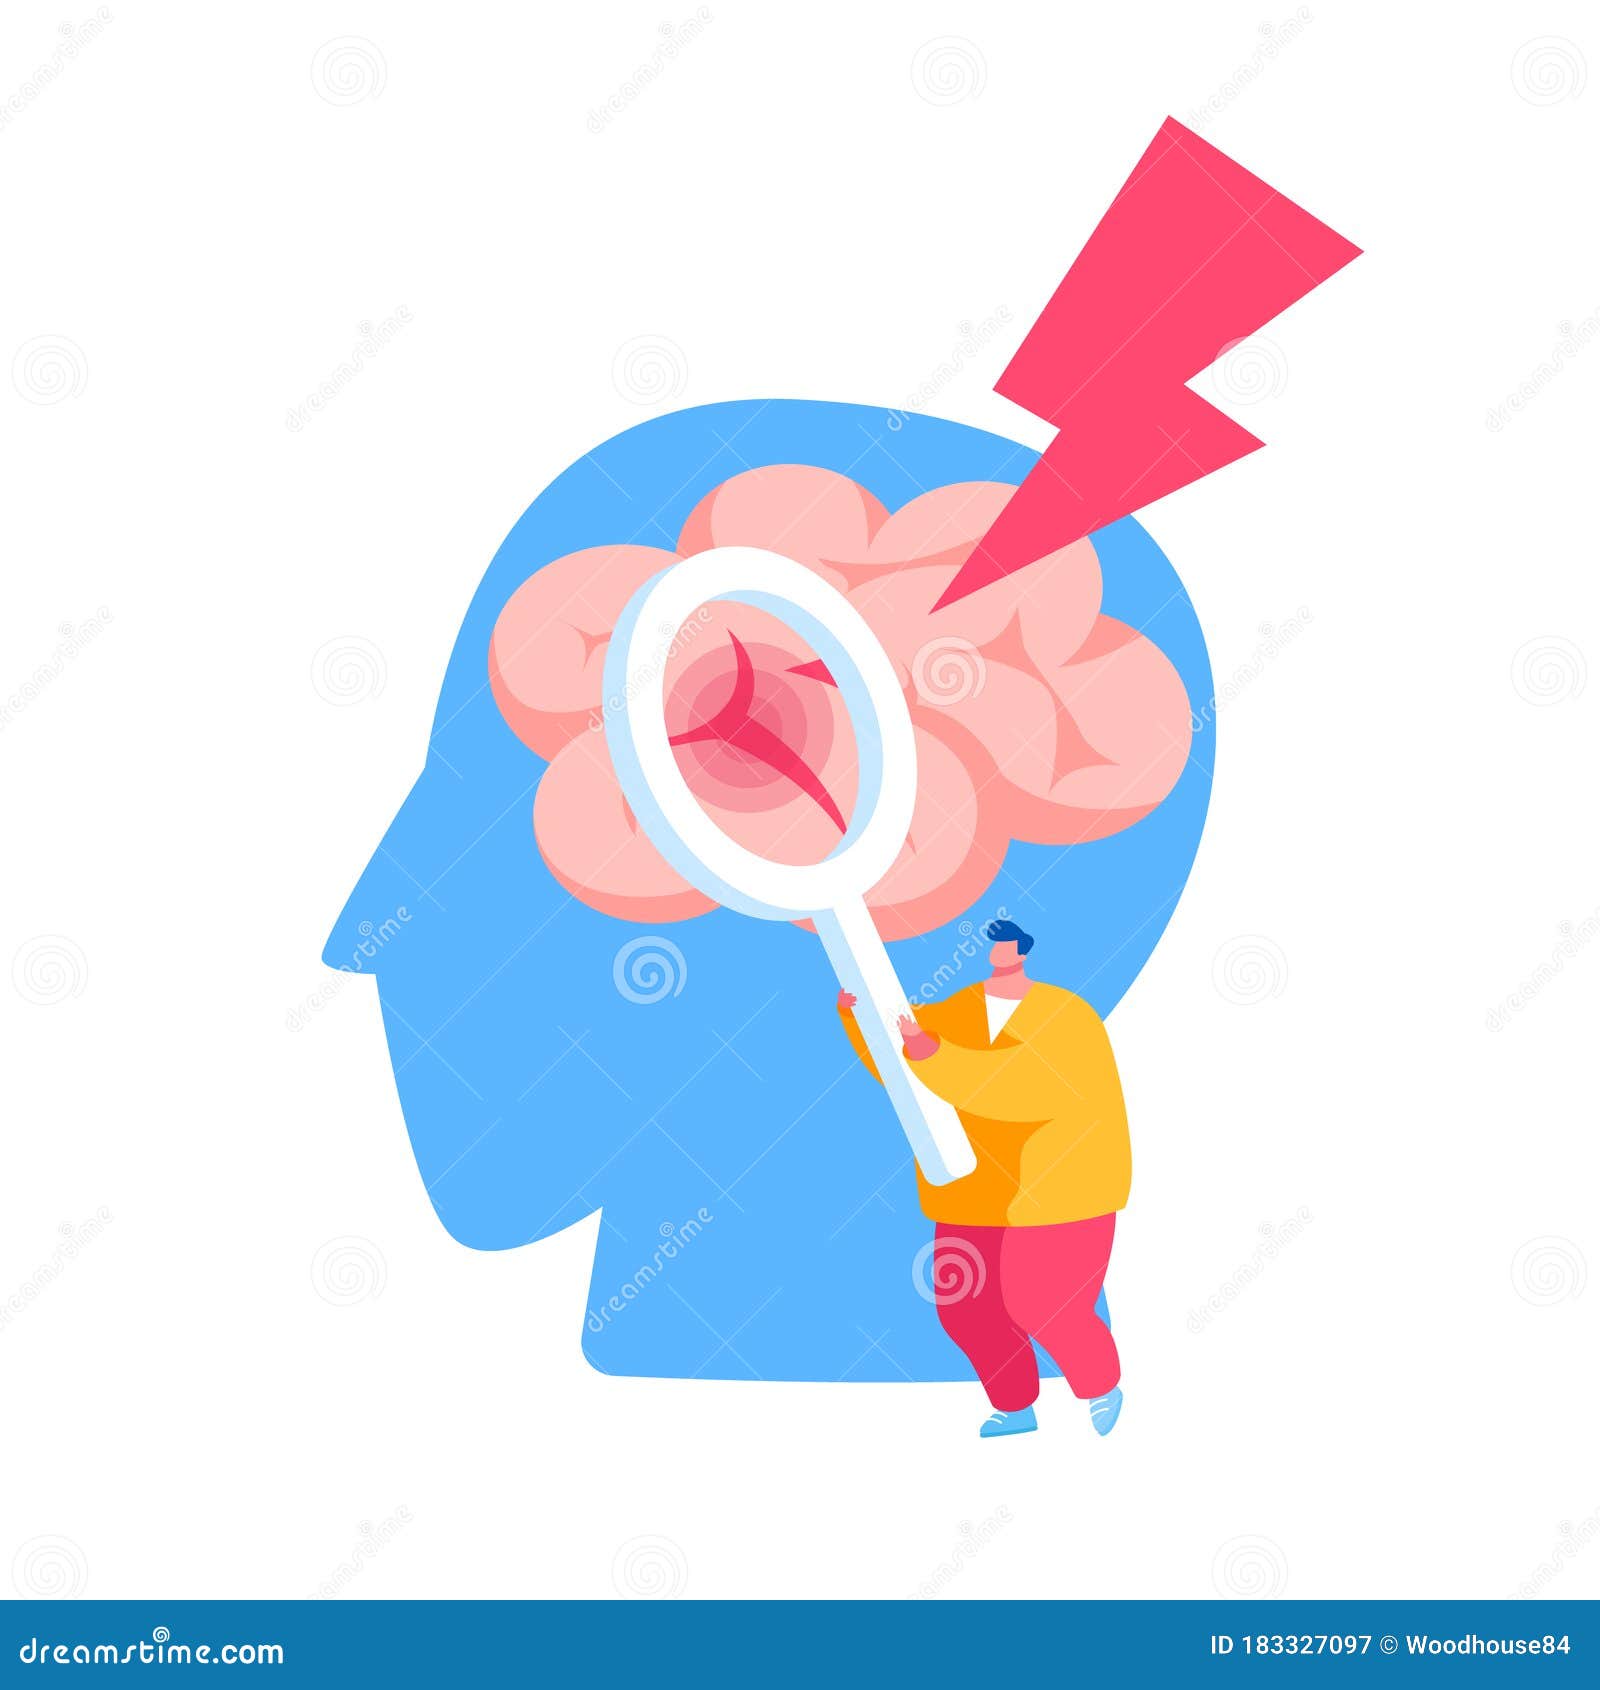 tiny male character holding magnifying glass looking on huge human head with apoplexy attack or brain stroke